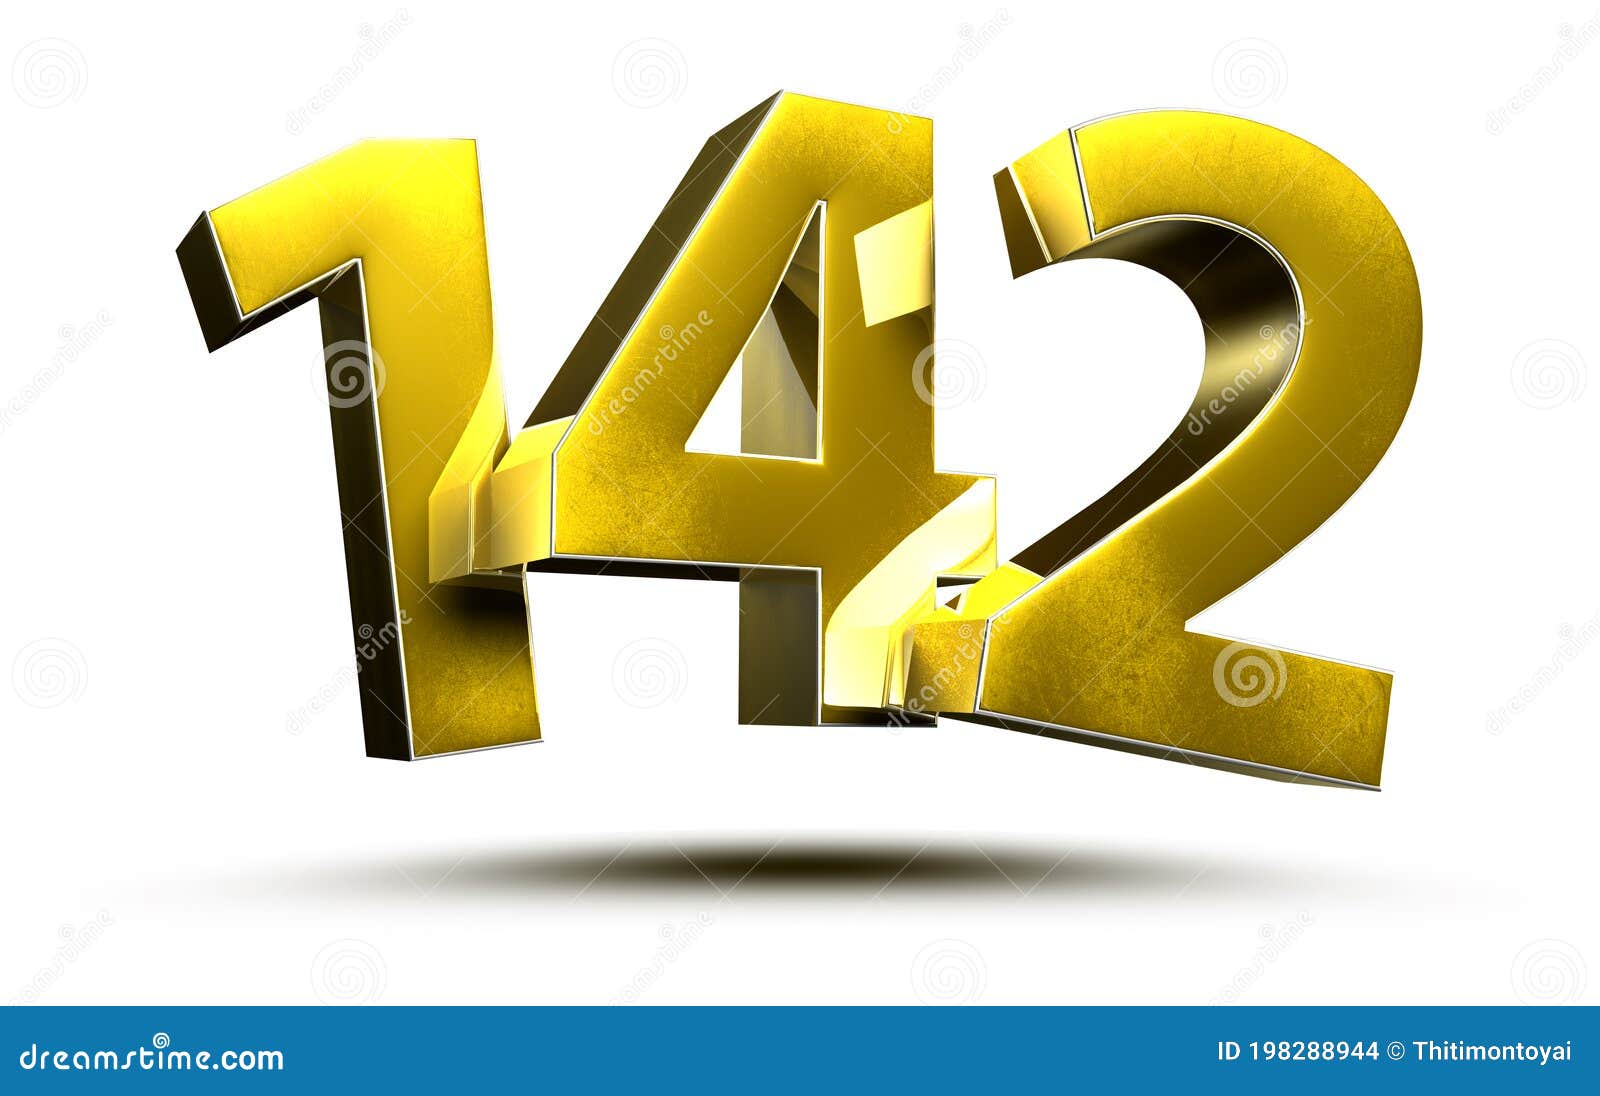 532 Number 24 Clip Images, Stock Photos, 3D objects, & Vectors